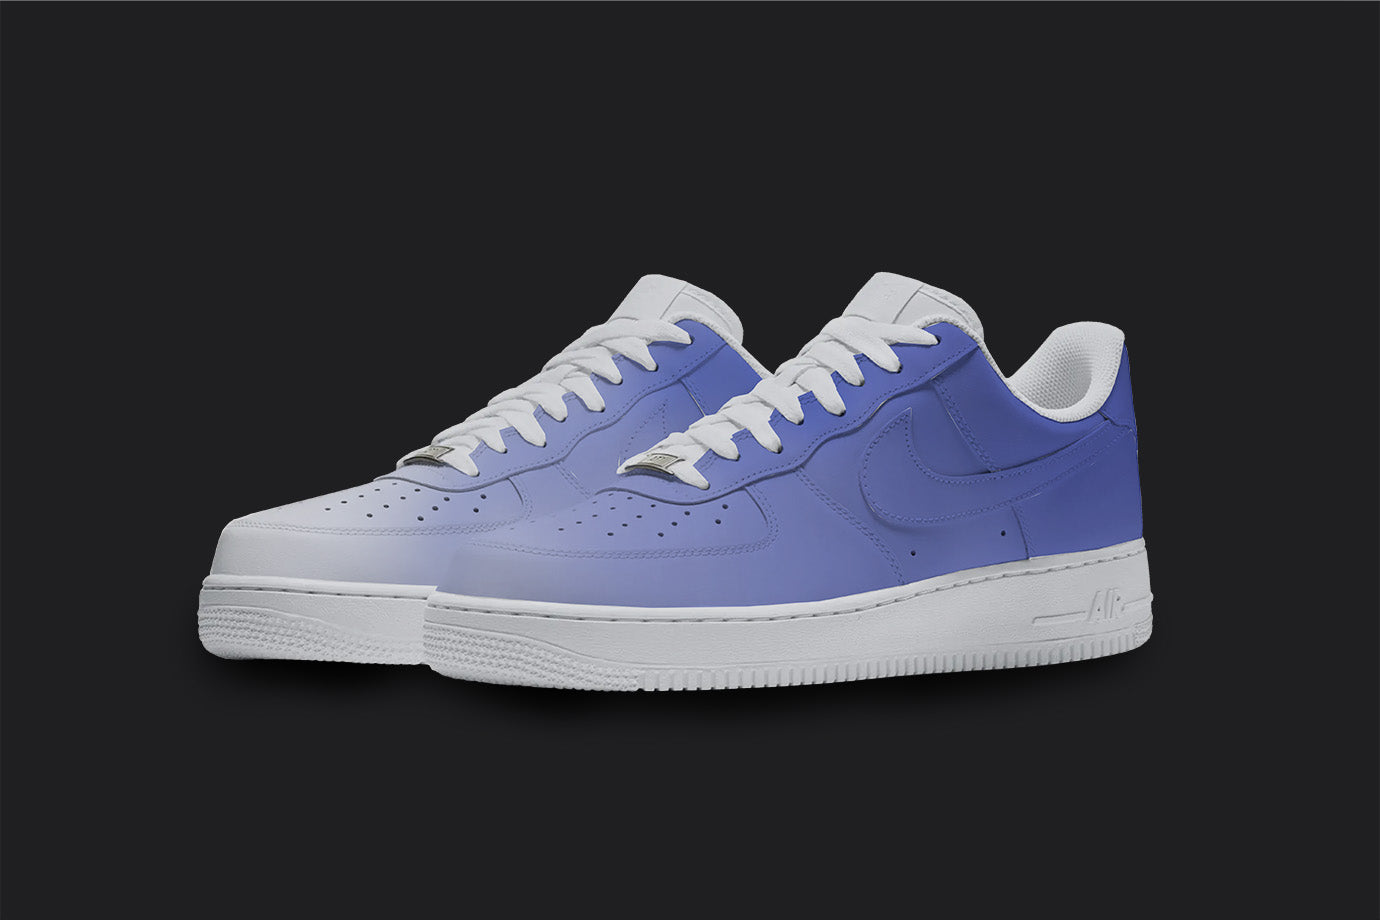 The image is of a Custom Nike Air force 1 sneaker pair on a blank black background. The white custom sneakers have a blue fade all over design. 